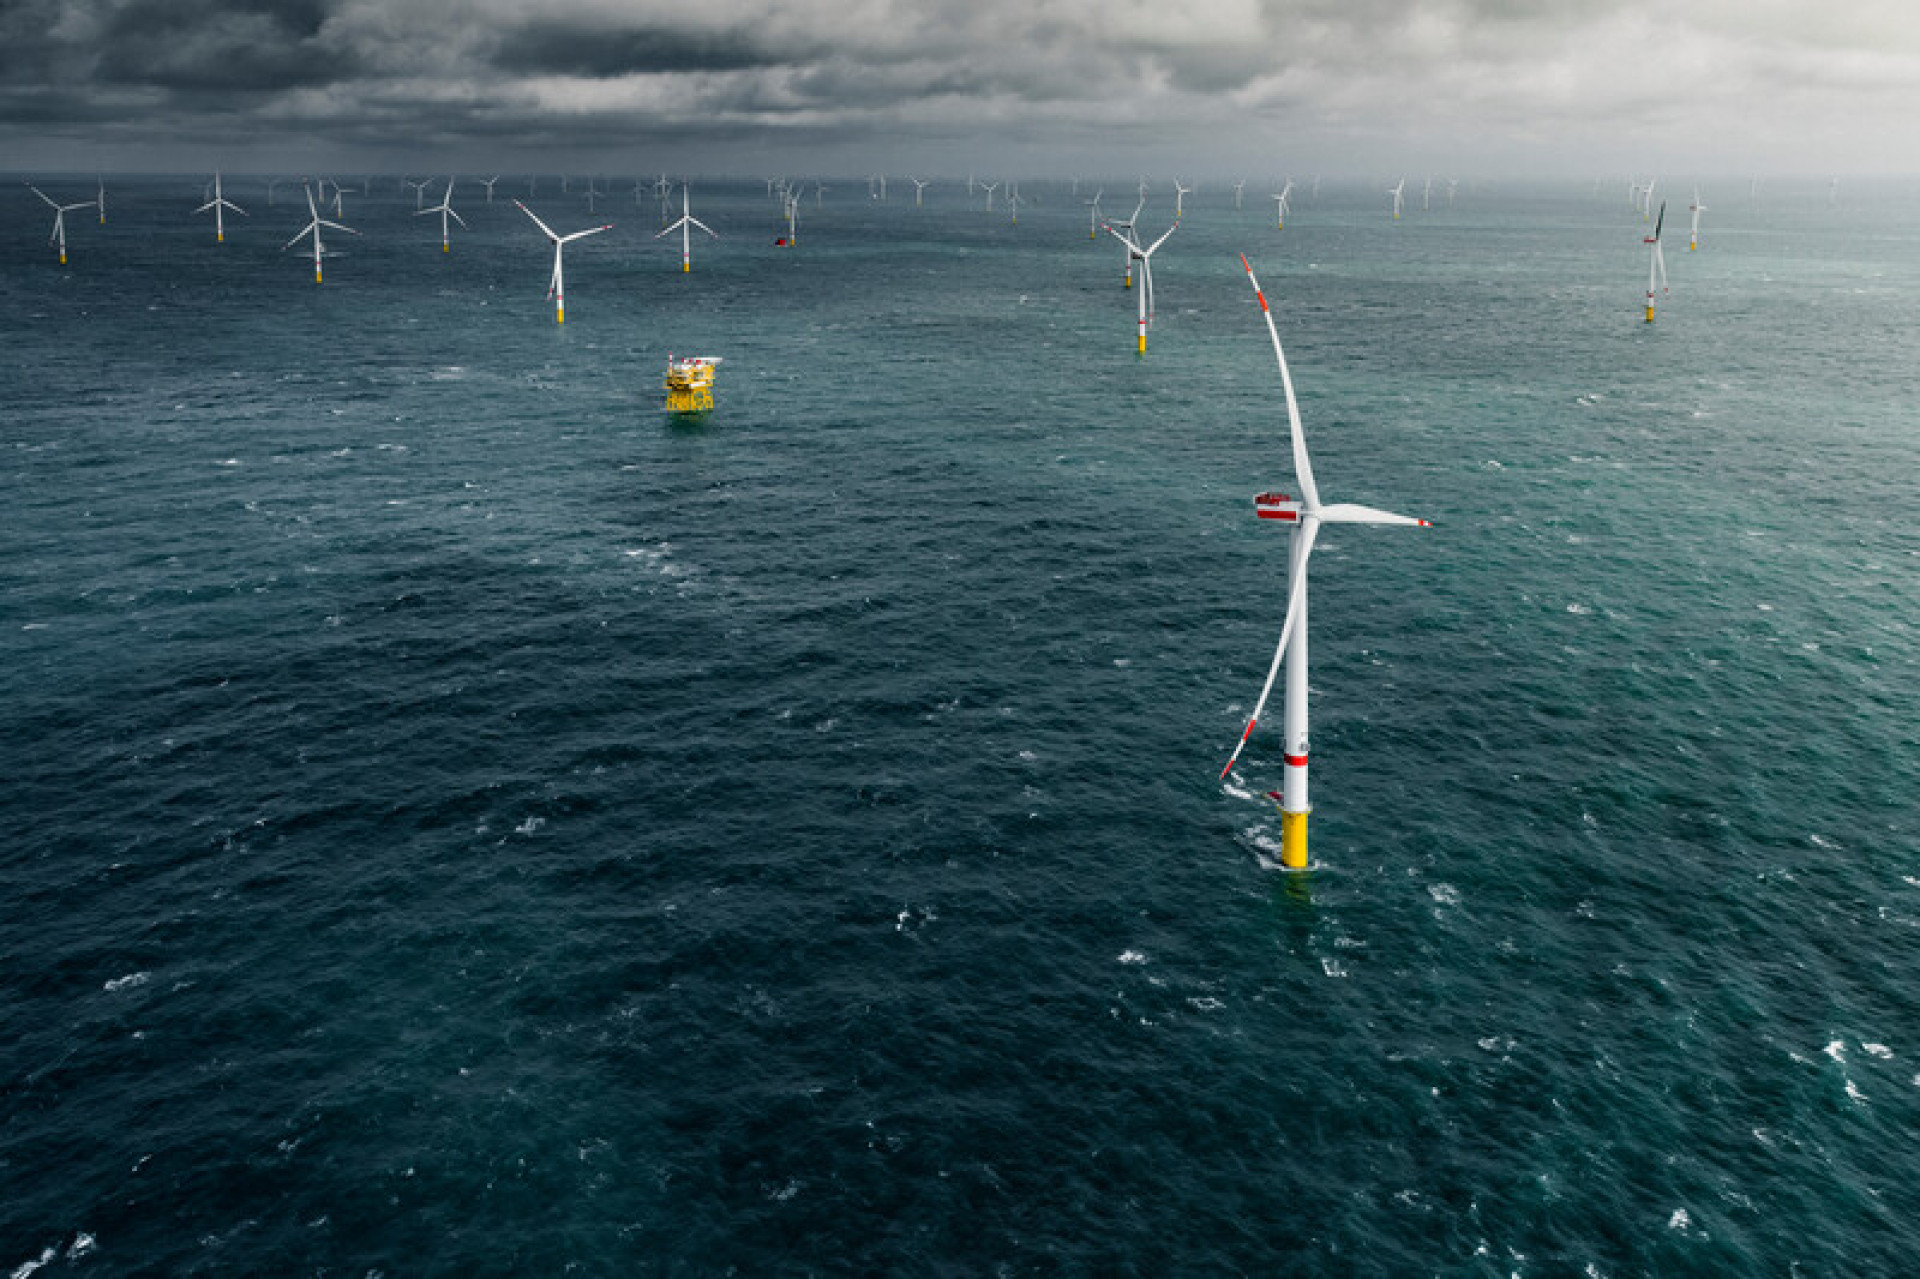 Deutsche Bucht is MHI Vestas' second offshore wind project in the German North Sea. Its 33 V164-8.4 MW turbines began producing electricity in July 2019, and produce enough energy to power 328,000 German homes. (Foto: Tristan Stedman/foto de apoio ilustrativo)